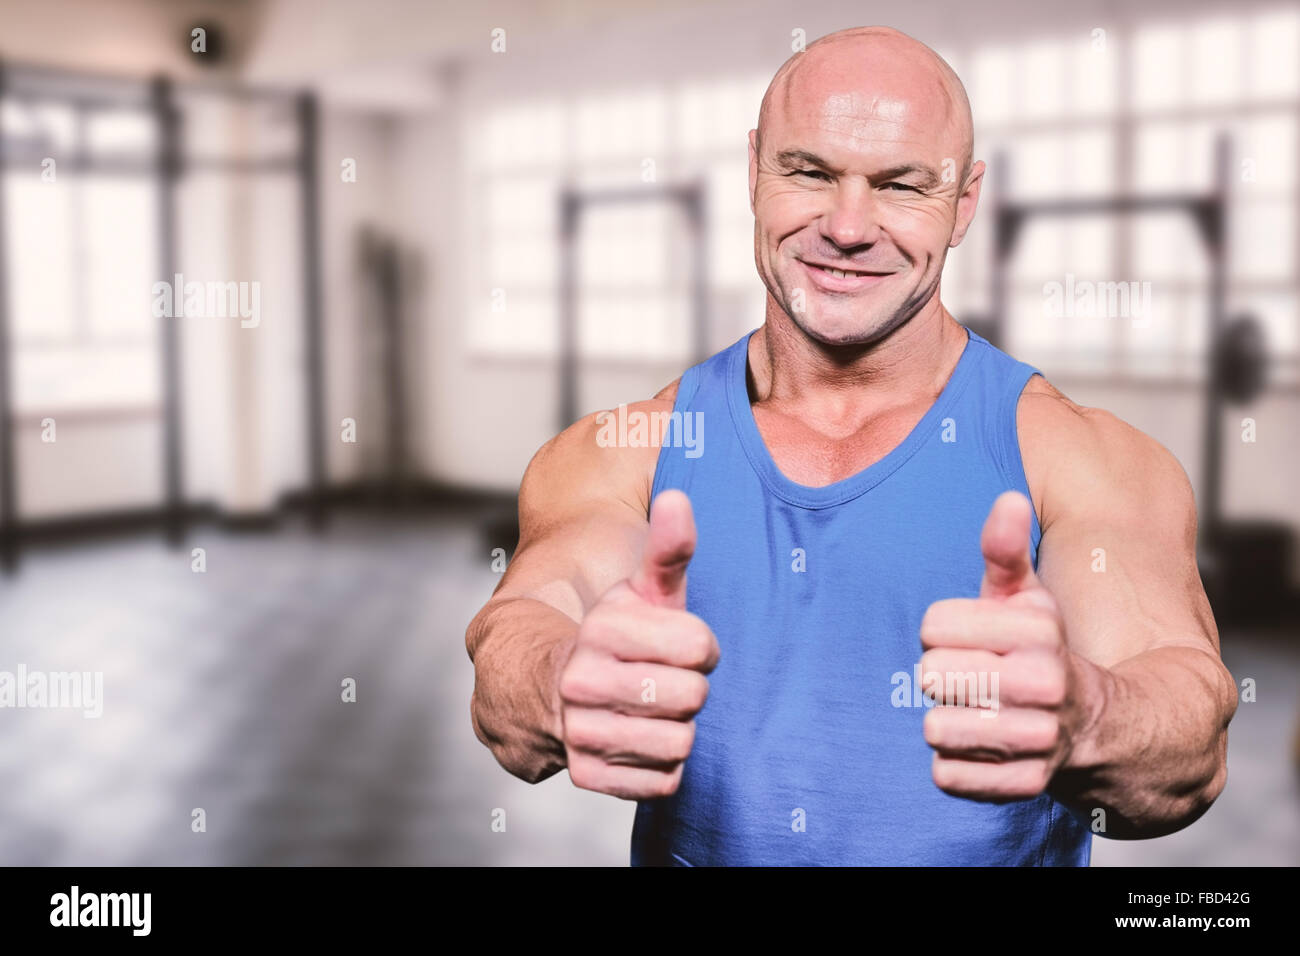 Composite image of smiling healthy man showing thumbs up Stock Photo